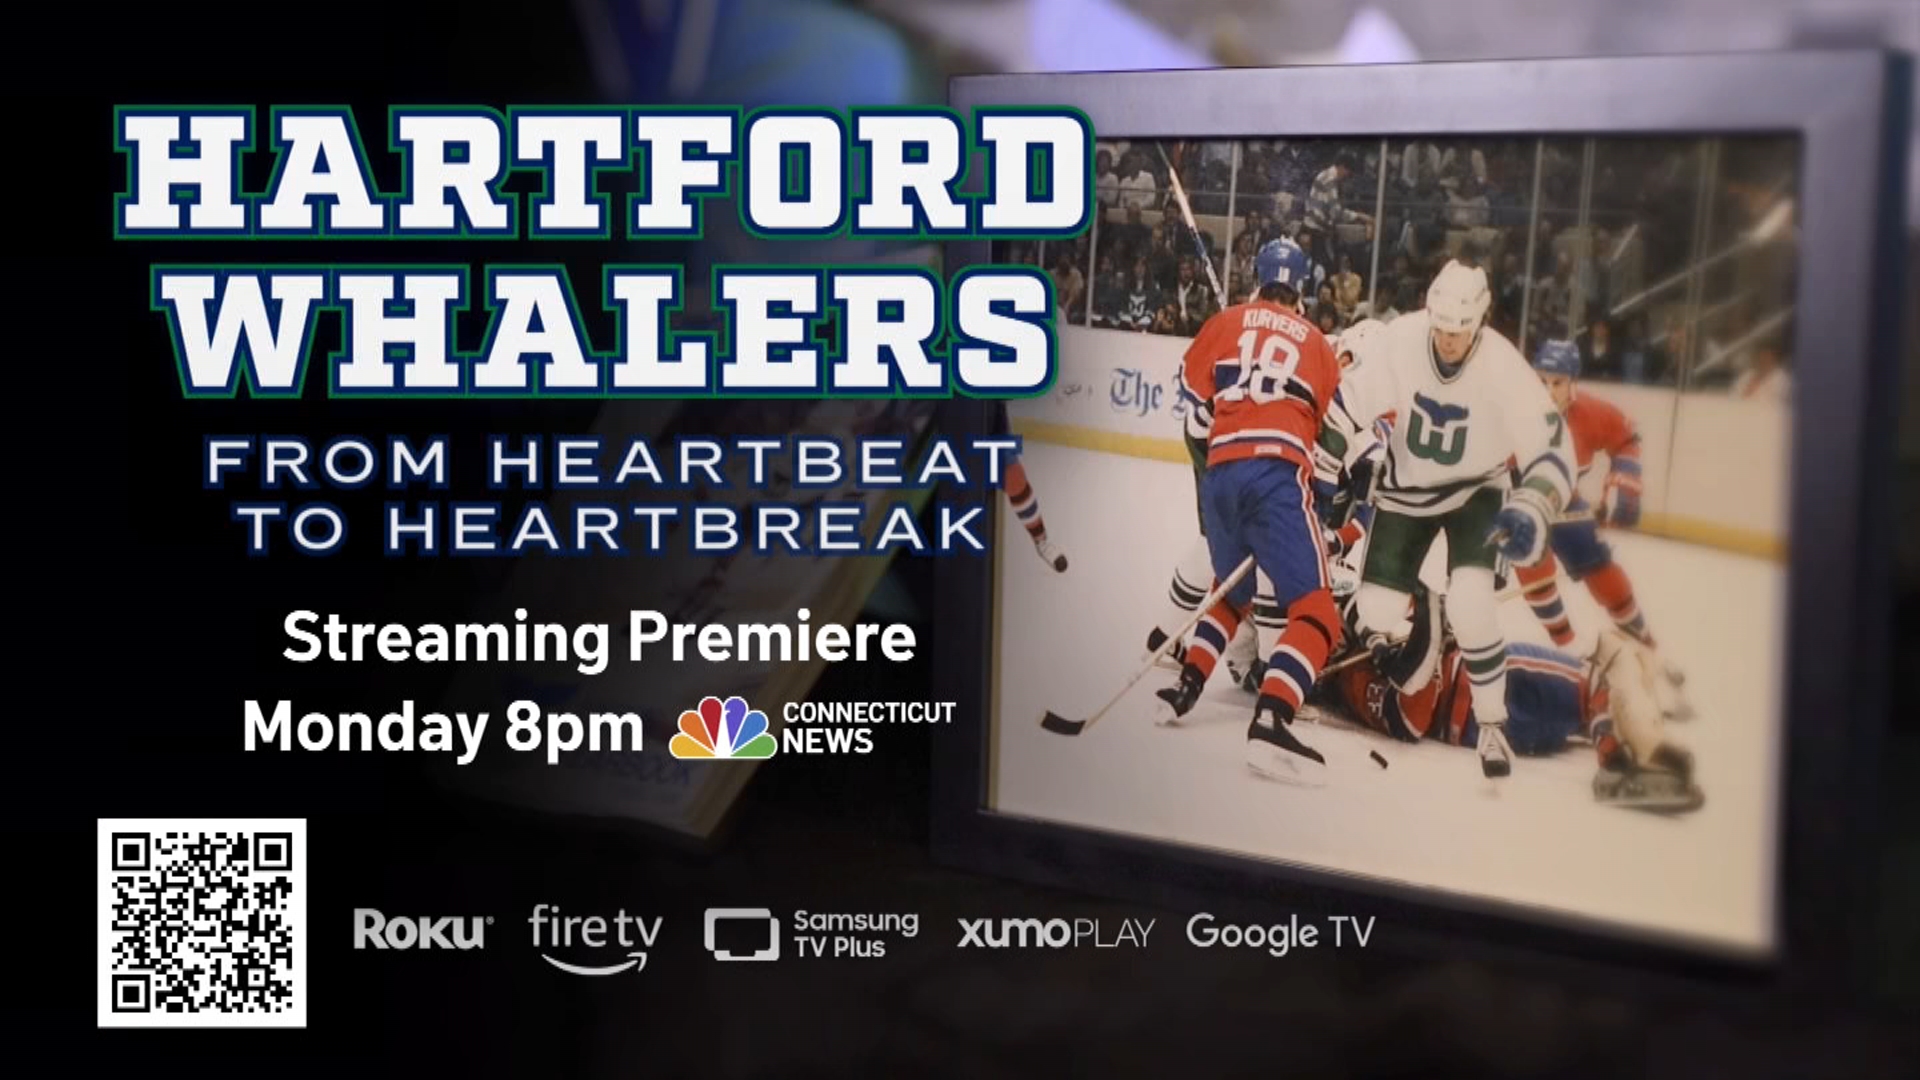 Hartford Whalers From Heartbeat to Heartbreak premieres this Monday